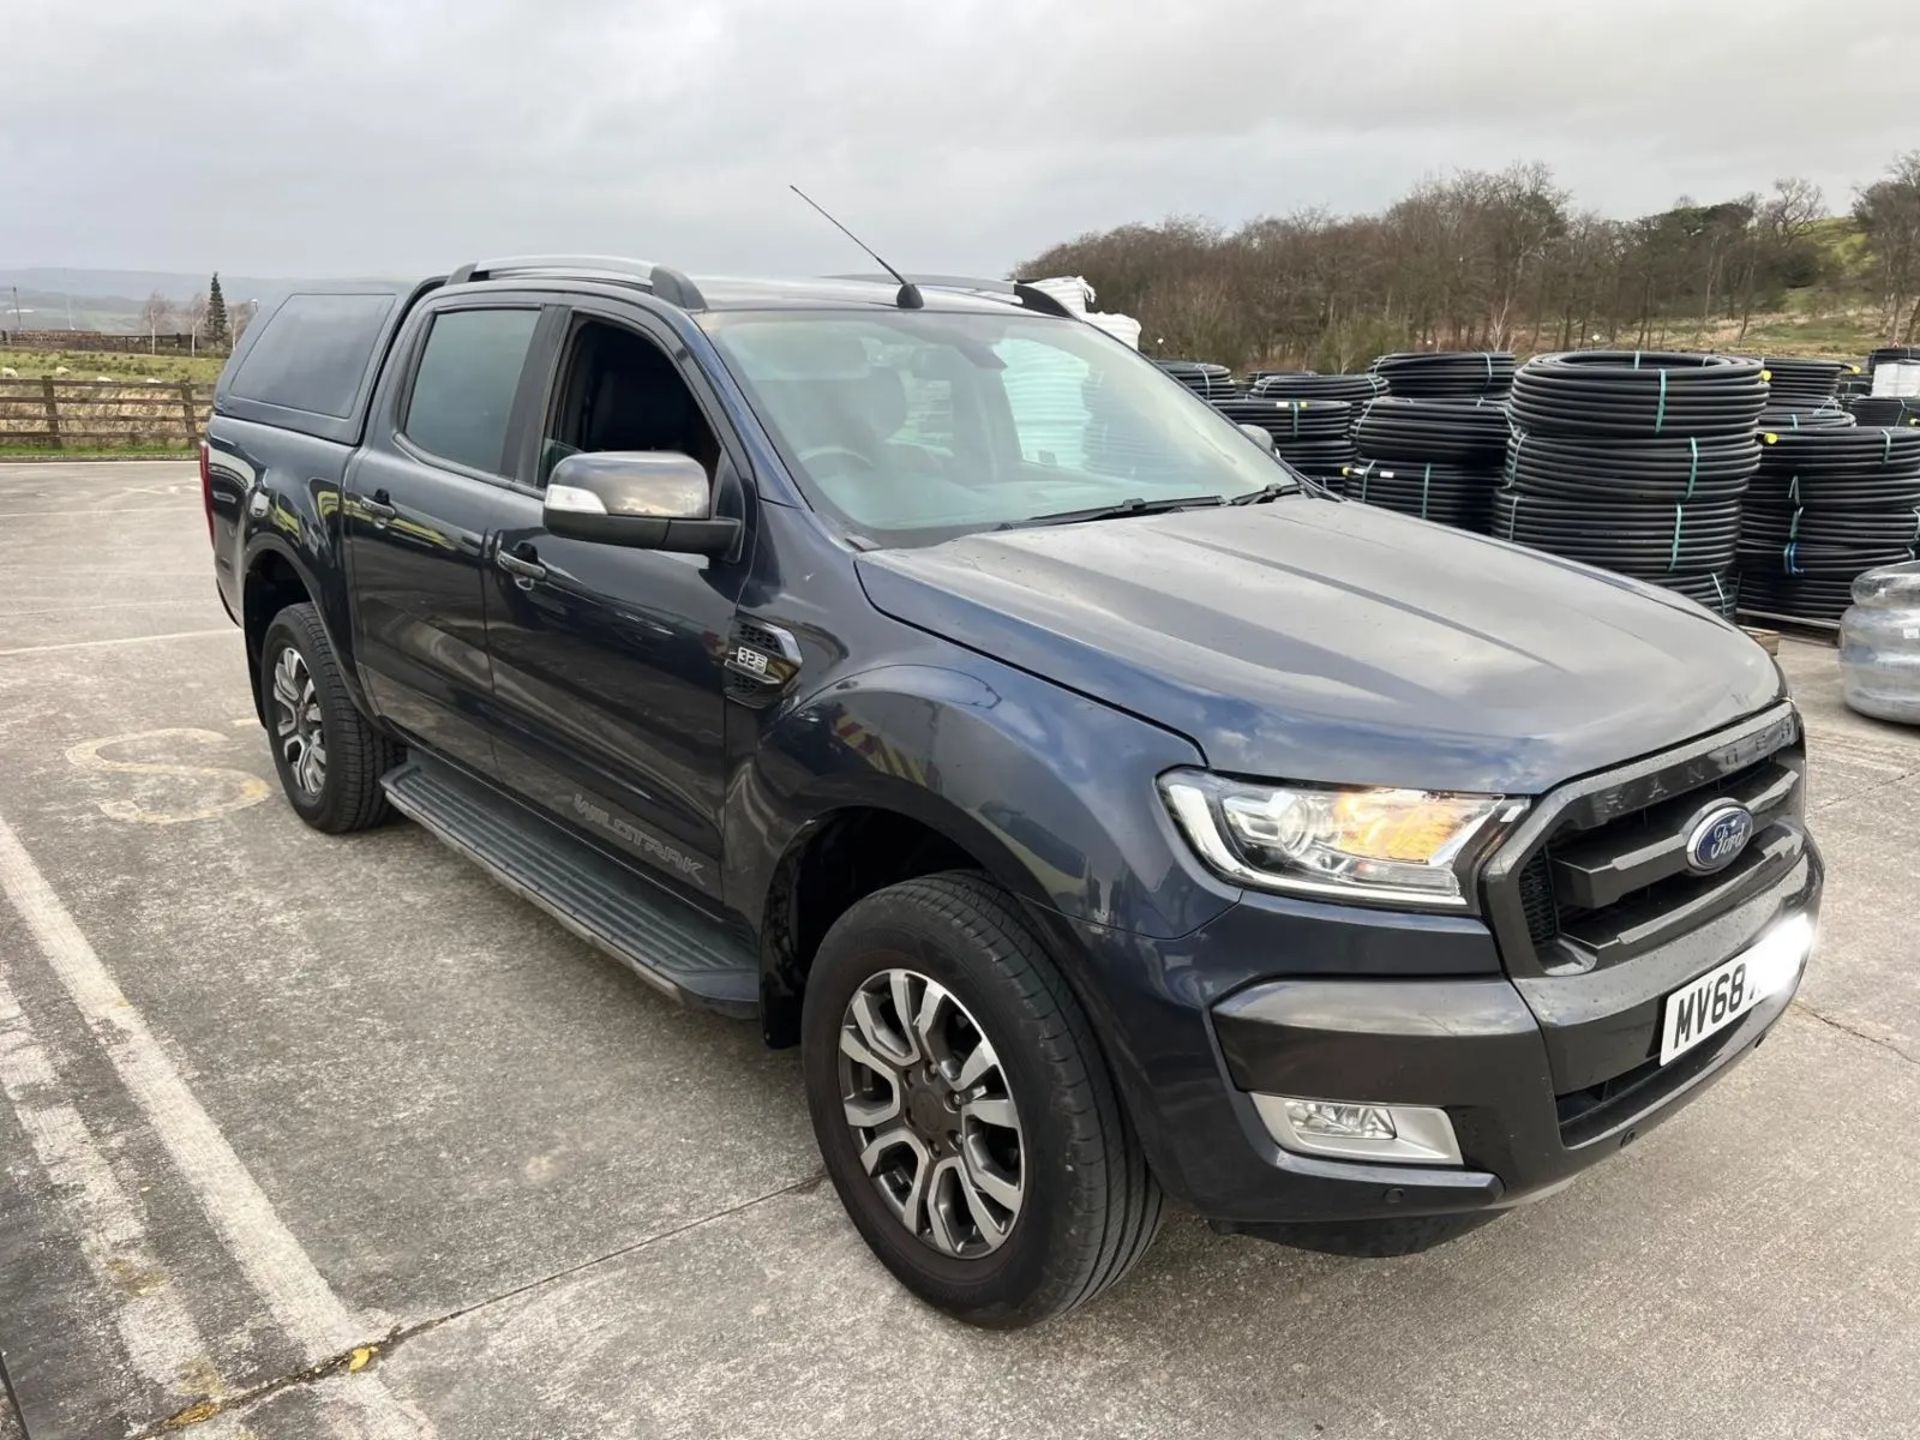 FORD RANGER WILDTRACK DOUBLE CAB 2018 - LOADED WITH FEATURES, IMPECCABLE CONDITION